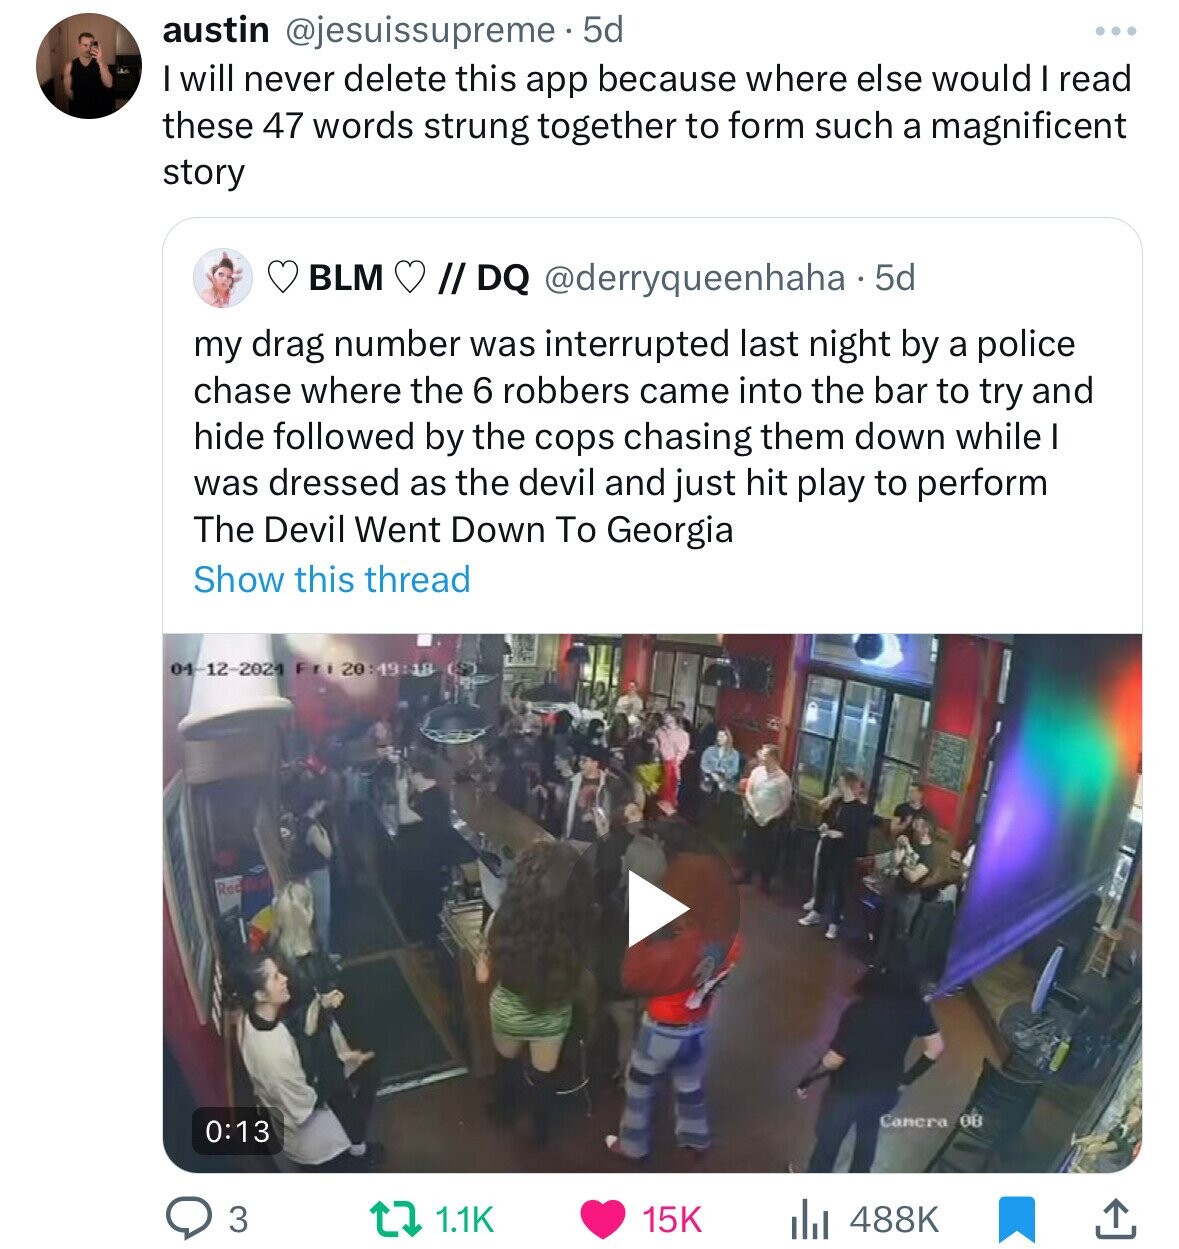 screenshot - austin . 5d I will never delete this app because where else would I read these 47 words strung together to form such a magnificent story Blm Dq . 5d my drag number was interrupted last night by a police chase where the 6 robbers came into the